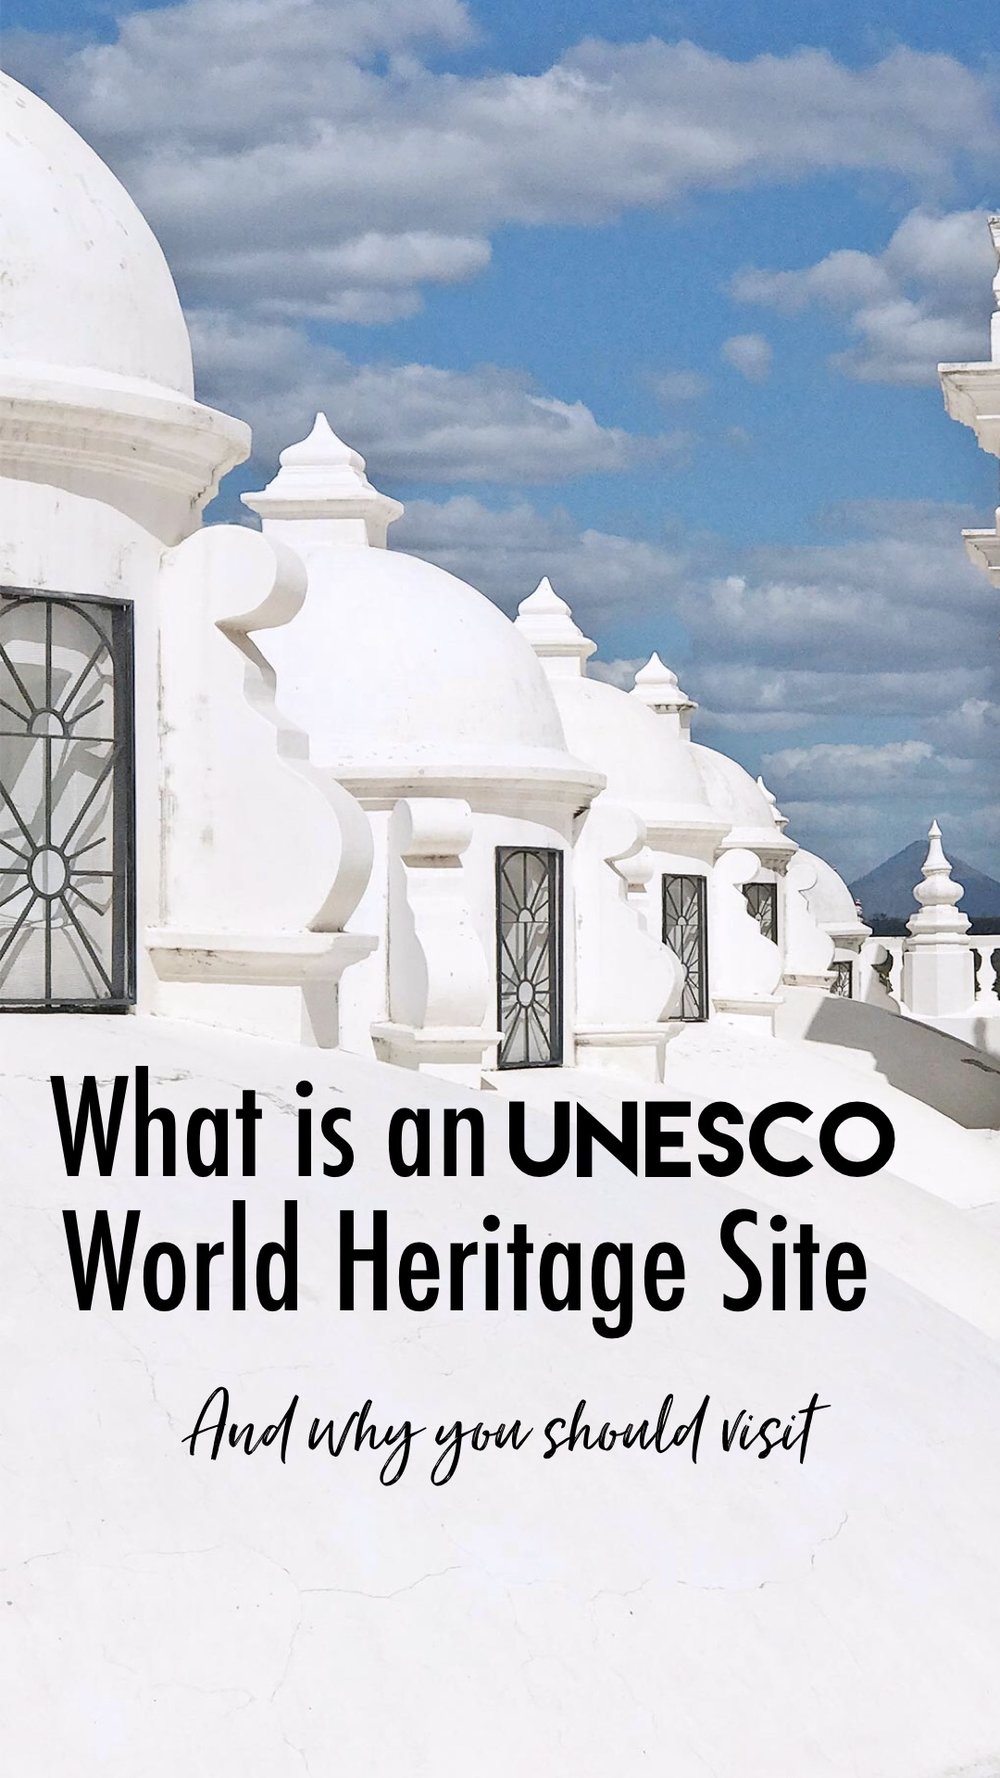 What is an UNESCO World Heritage Site?